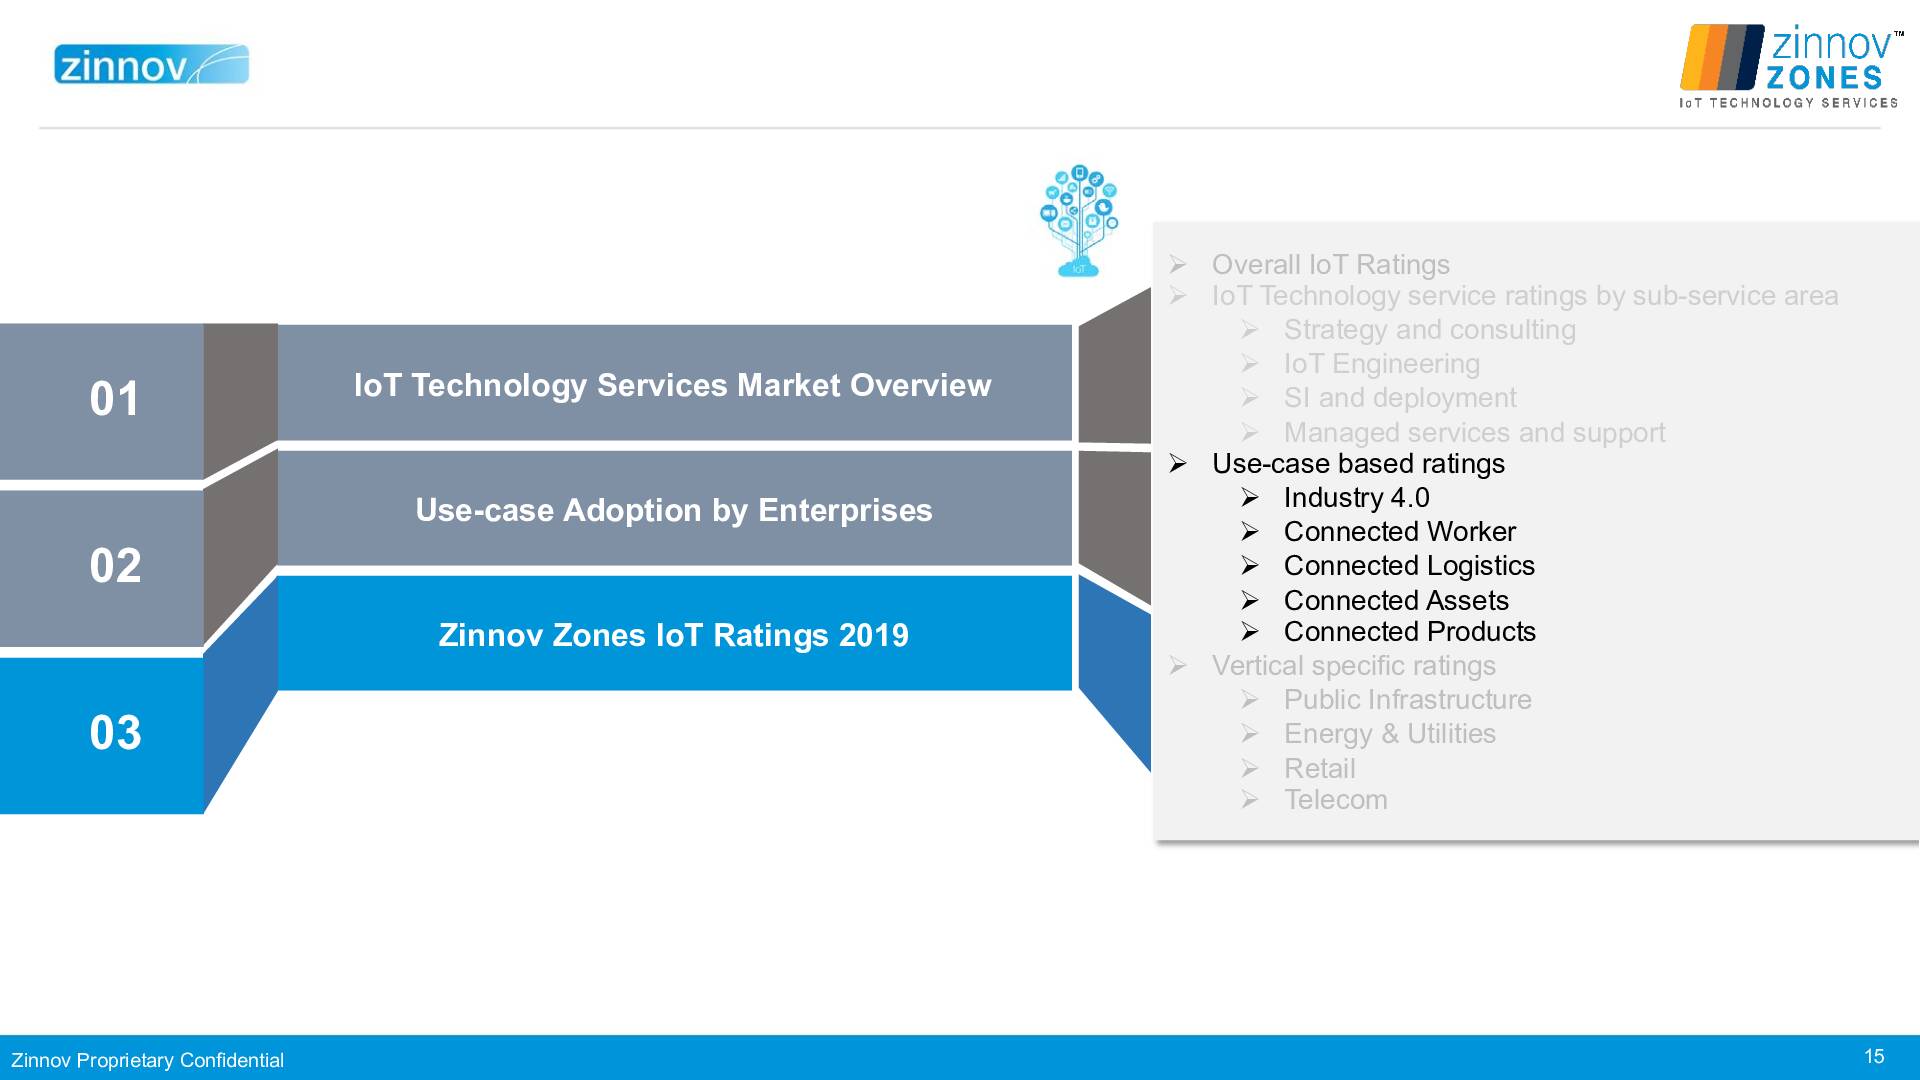 Zinnov Zones Iot Technology Services 2019 Ratings15